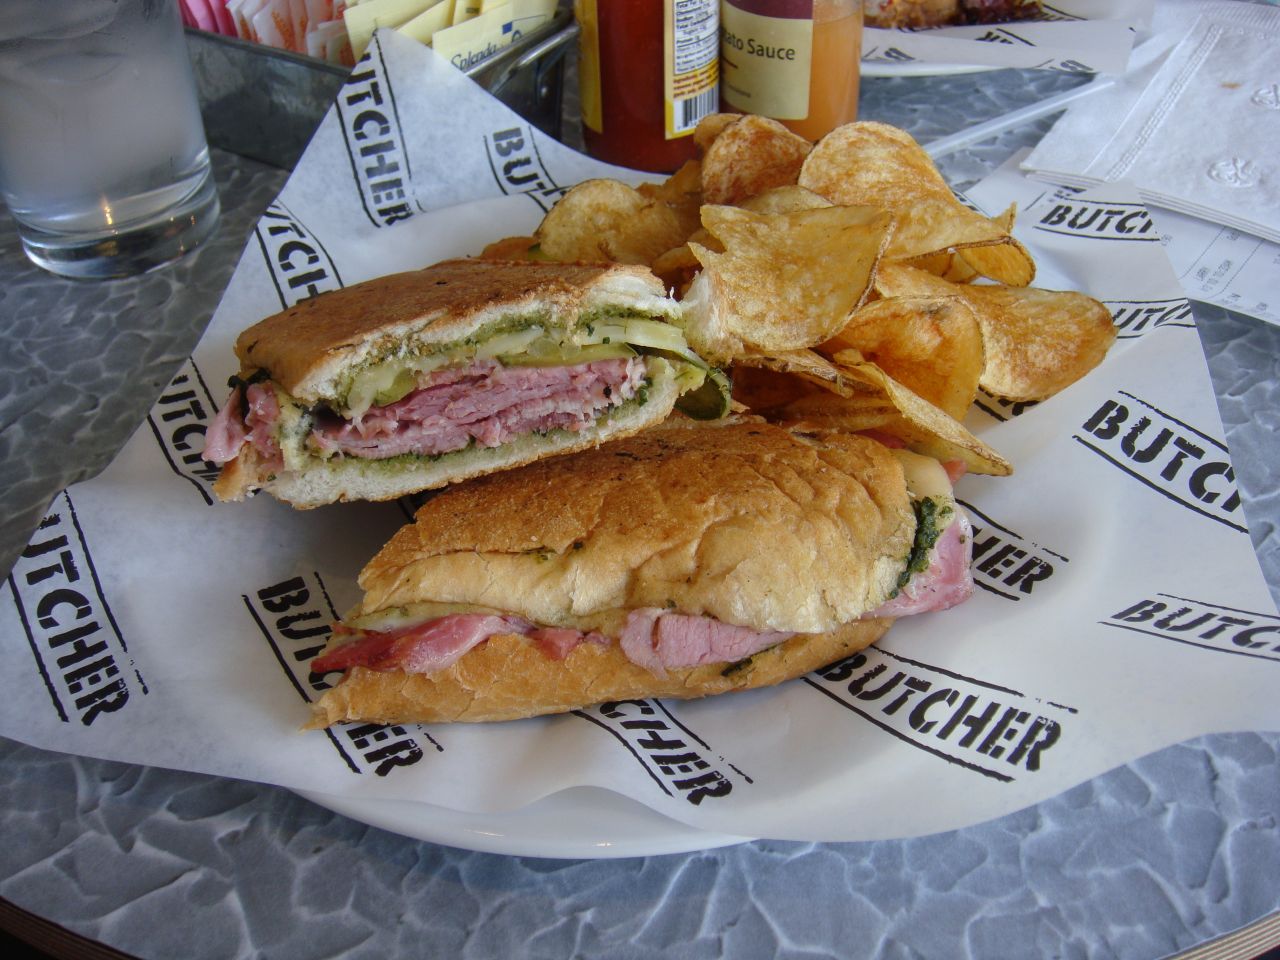 "It might sound funny, but the very best meal I had in New Orleans was a sandwich. A Cuban sandwich" from Cochon Butcher, said iReporter Melinda Green Harvey of Lubbock, Texas.